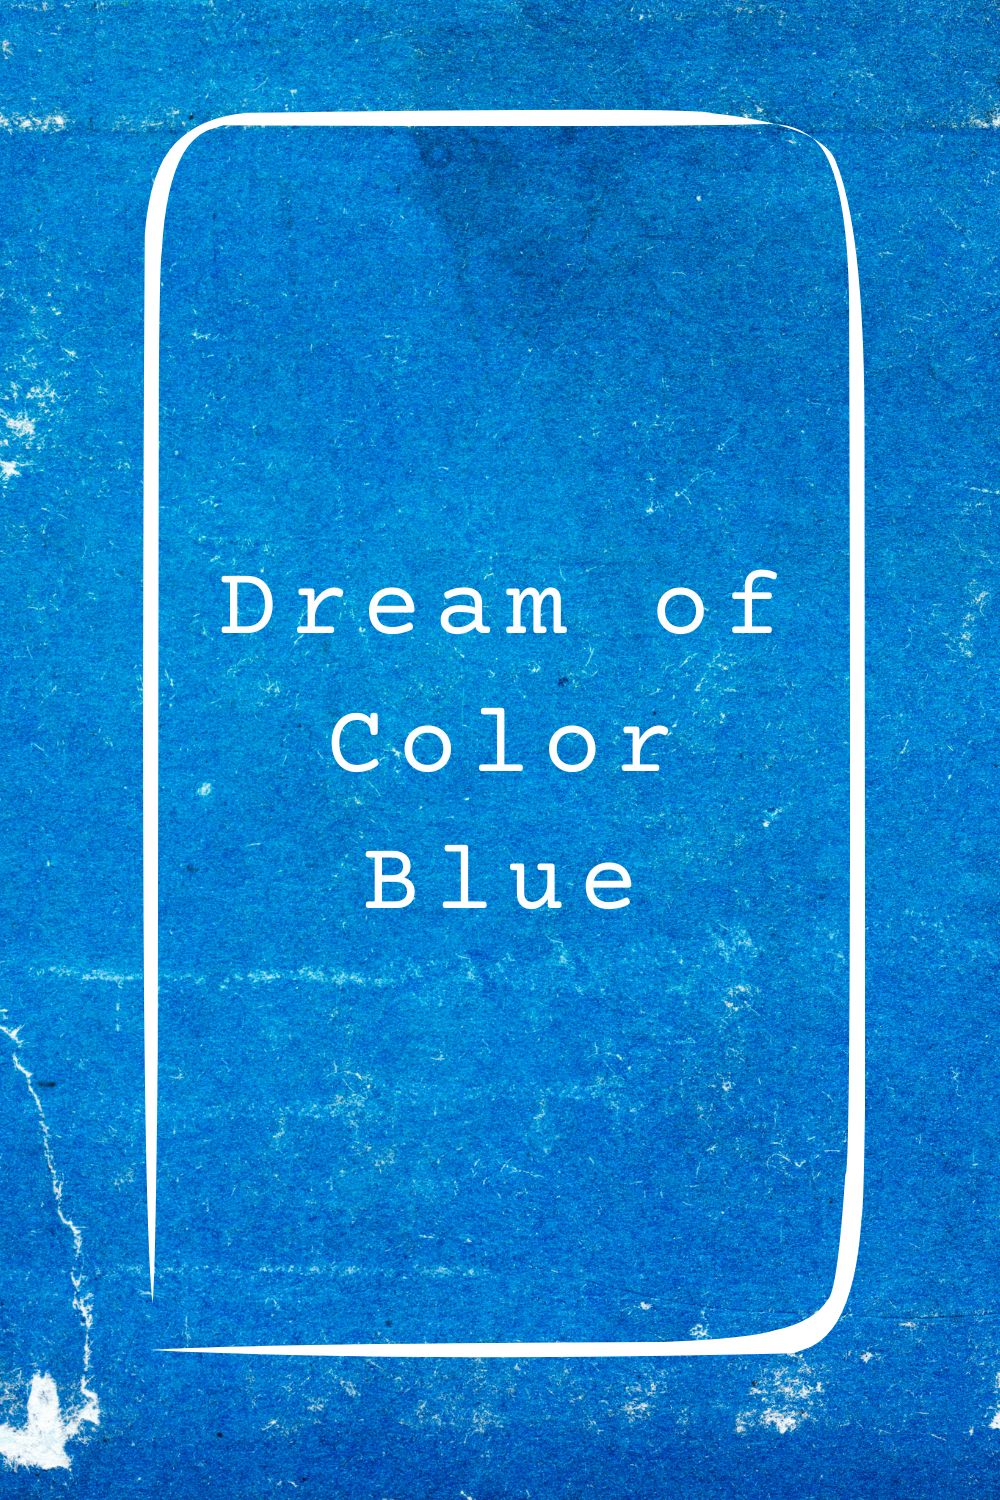 10 Dream of Color Blue Meanings1